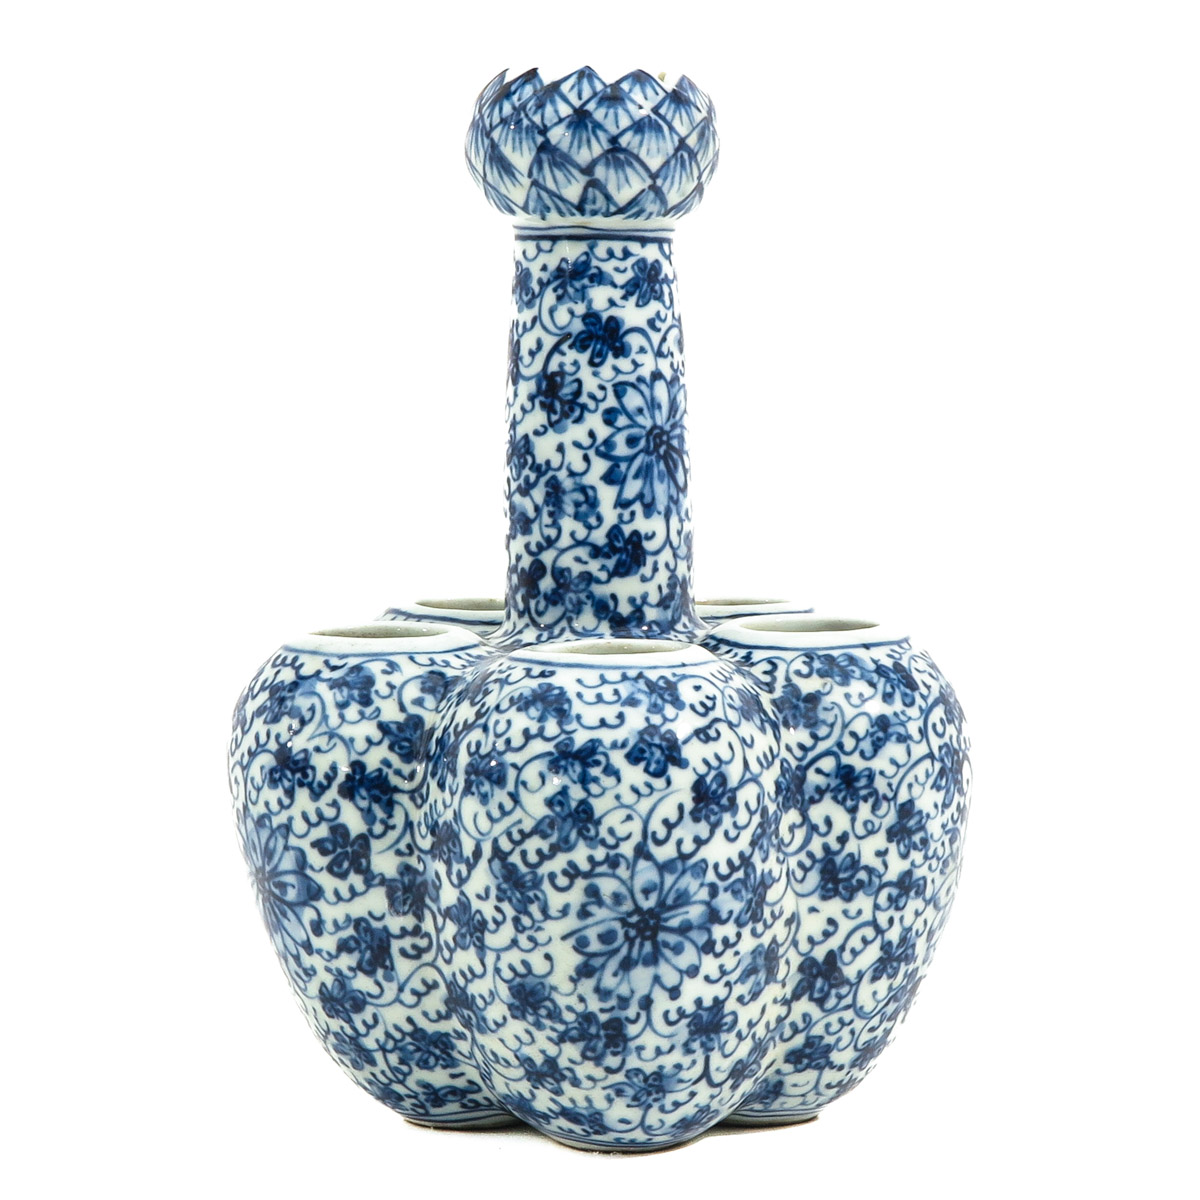 A Blue and White Tulip Vase - Image 3 of 10